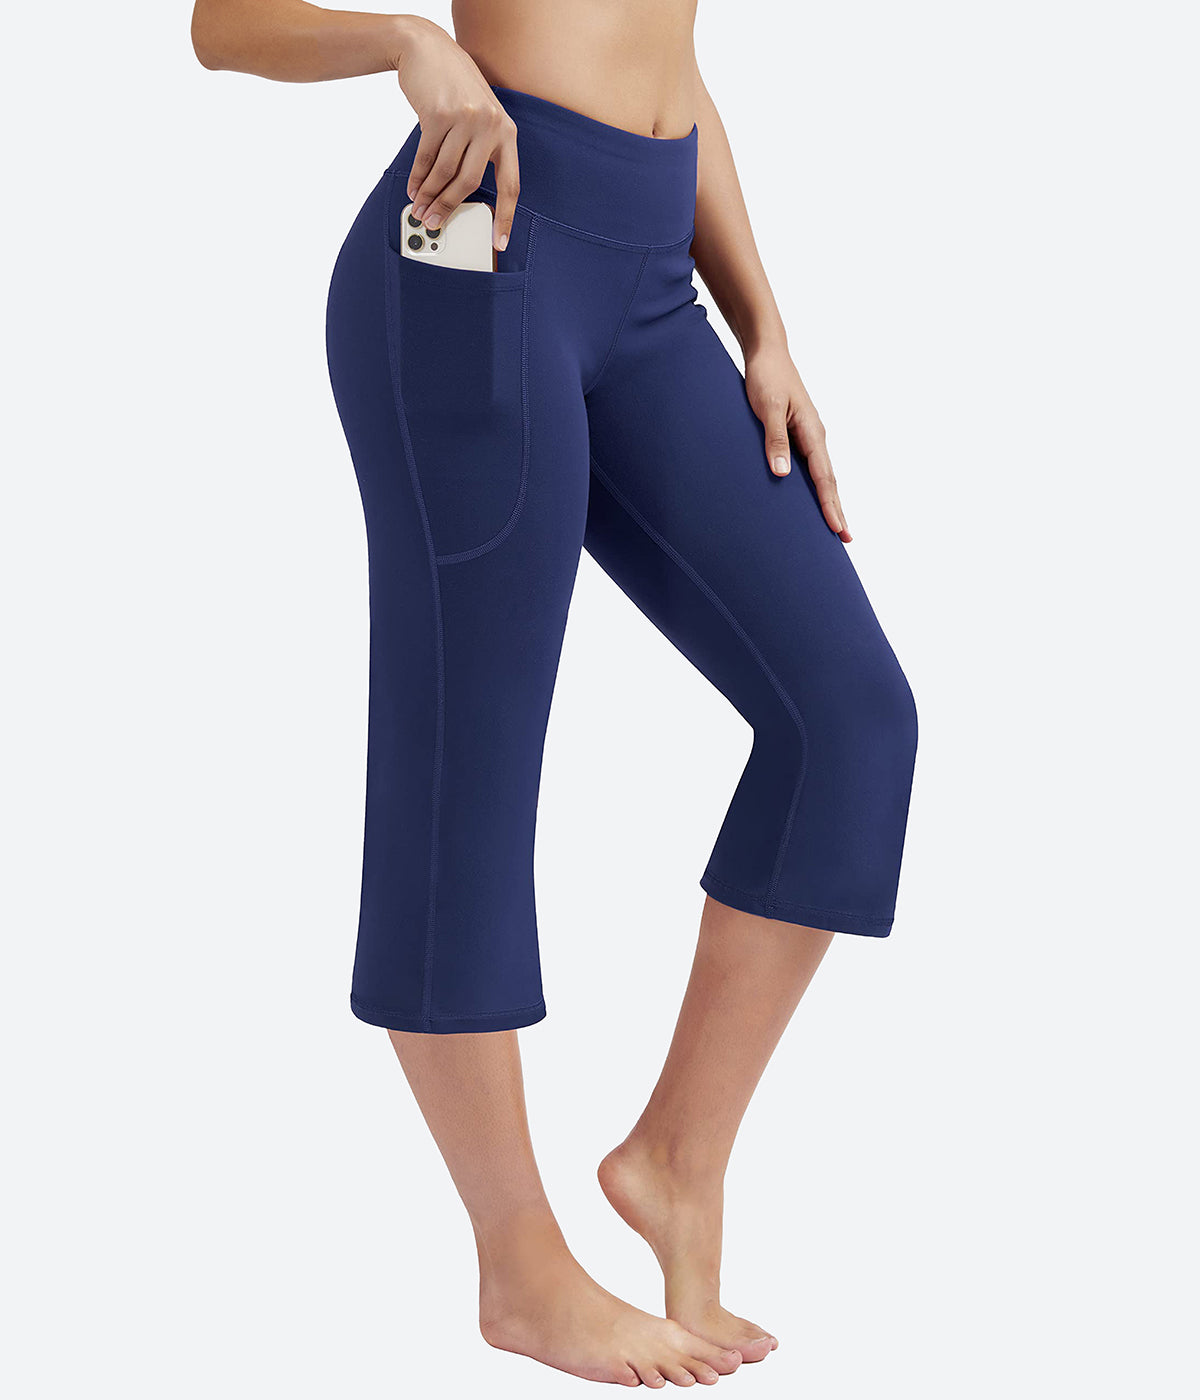 Buy Promover Bootcut Yoga Pants for Women Capri with Pockets